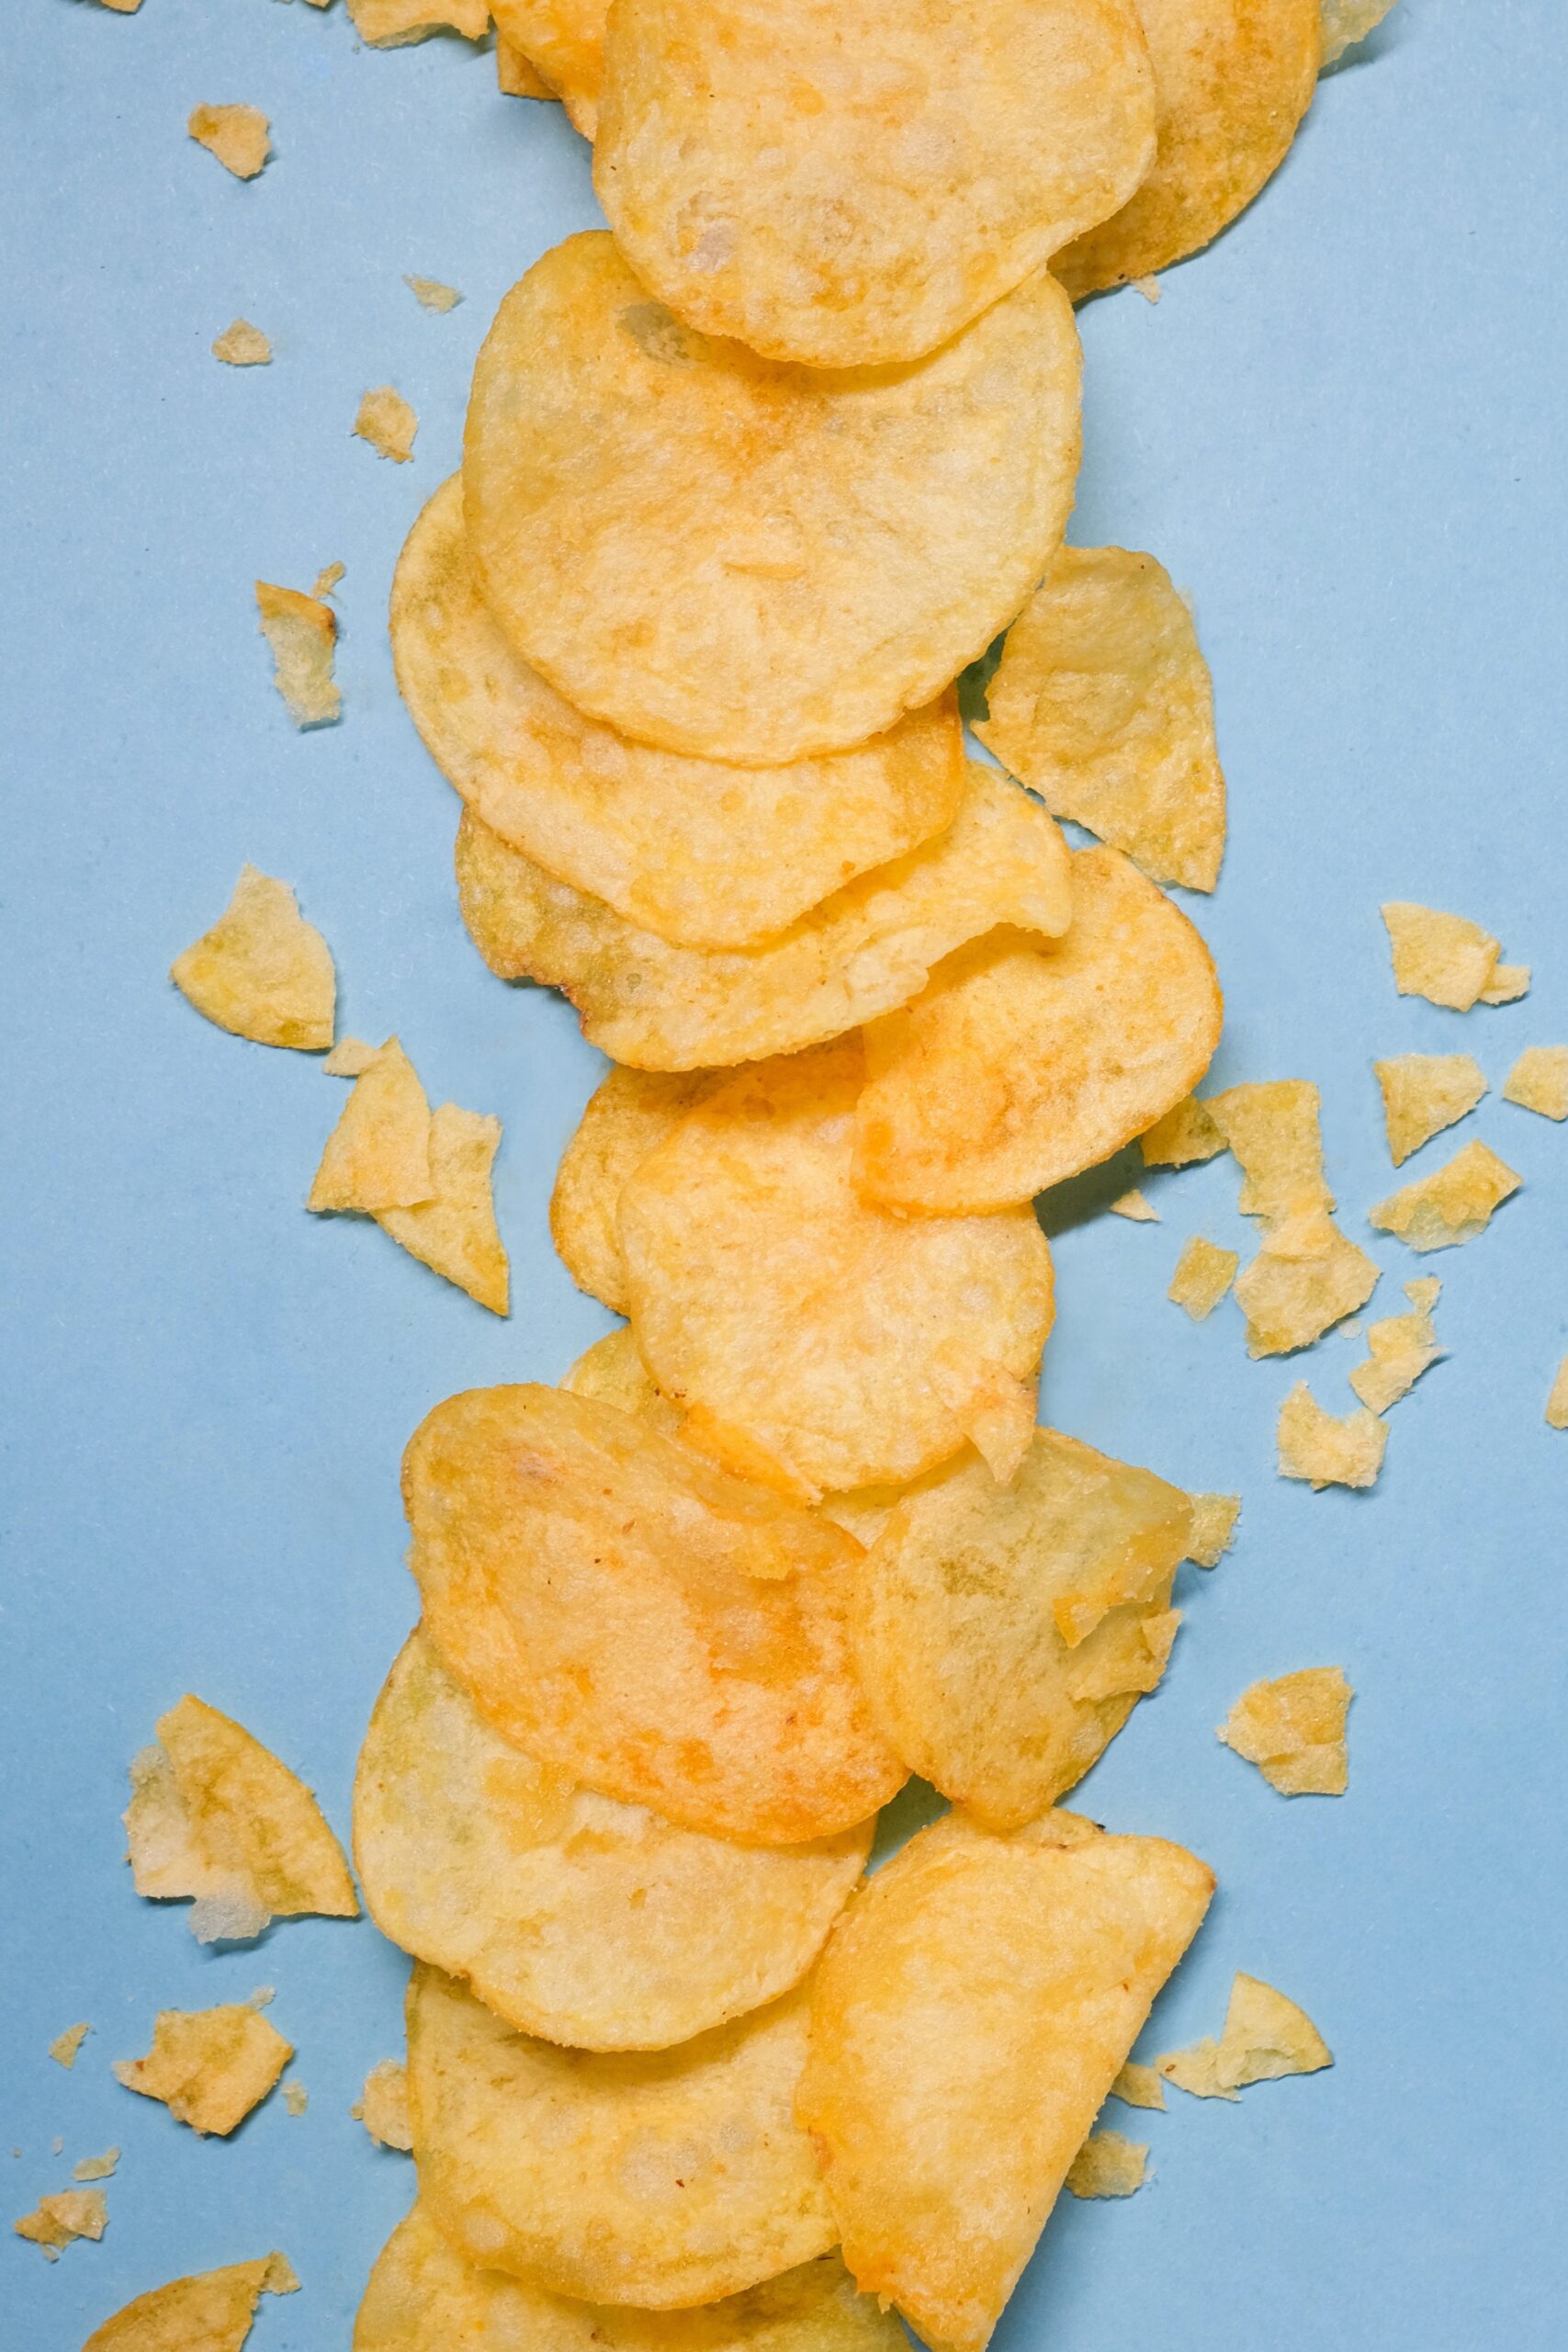 Is Lay’s Good For Health? Are The Chips Fried?